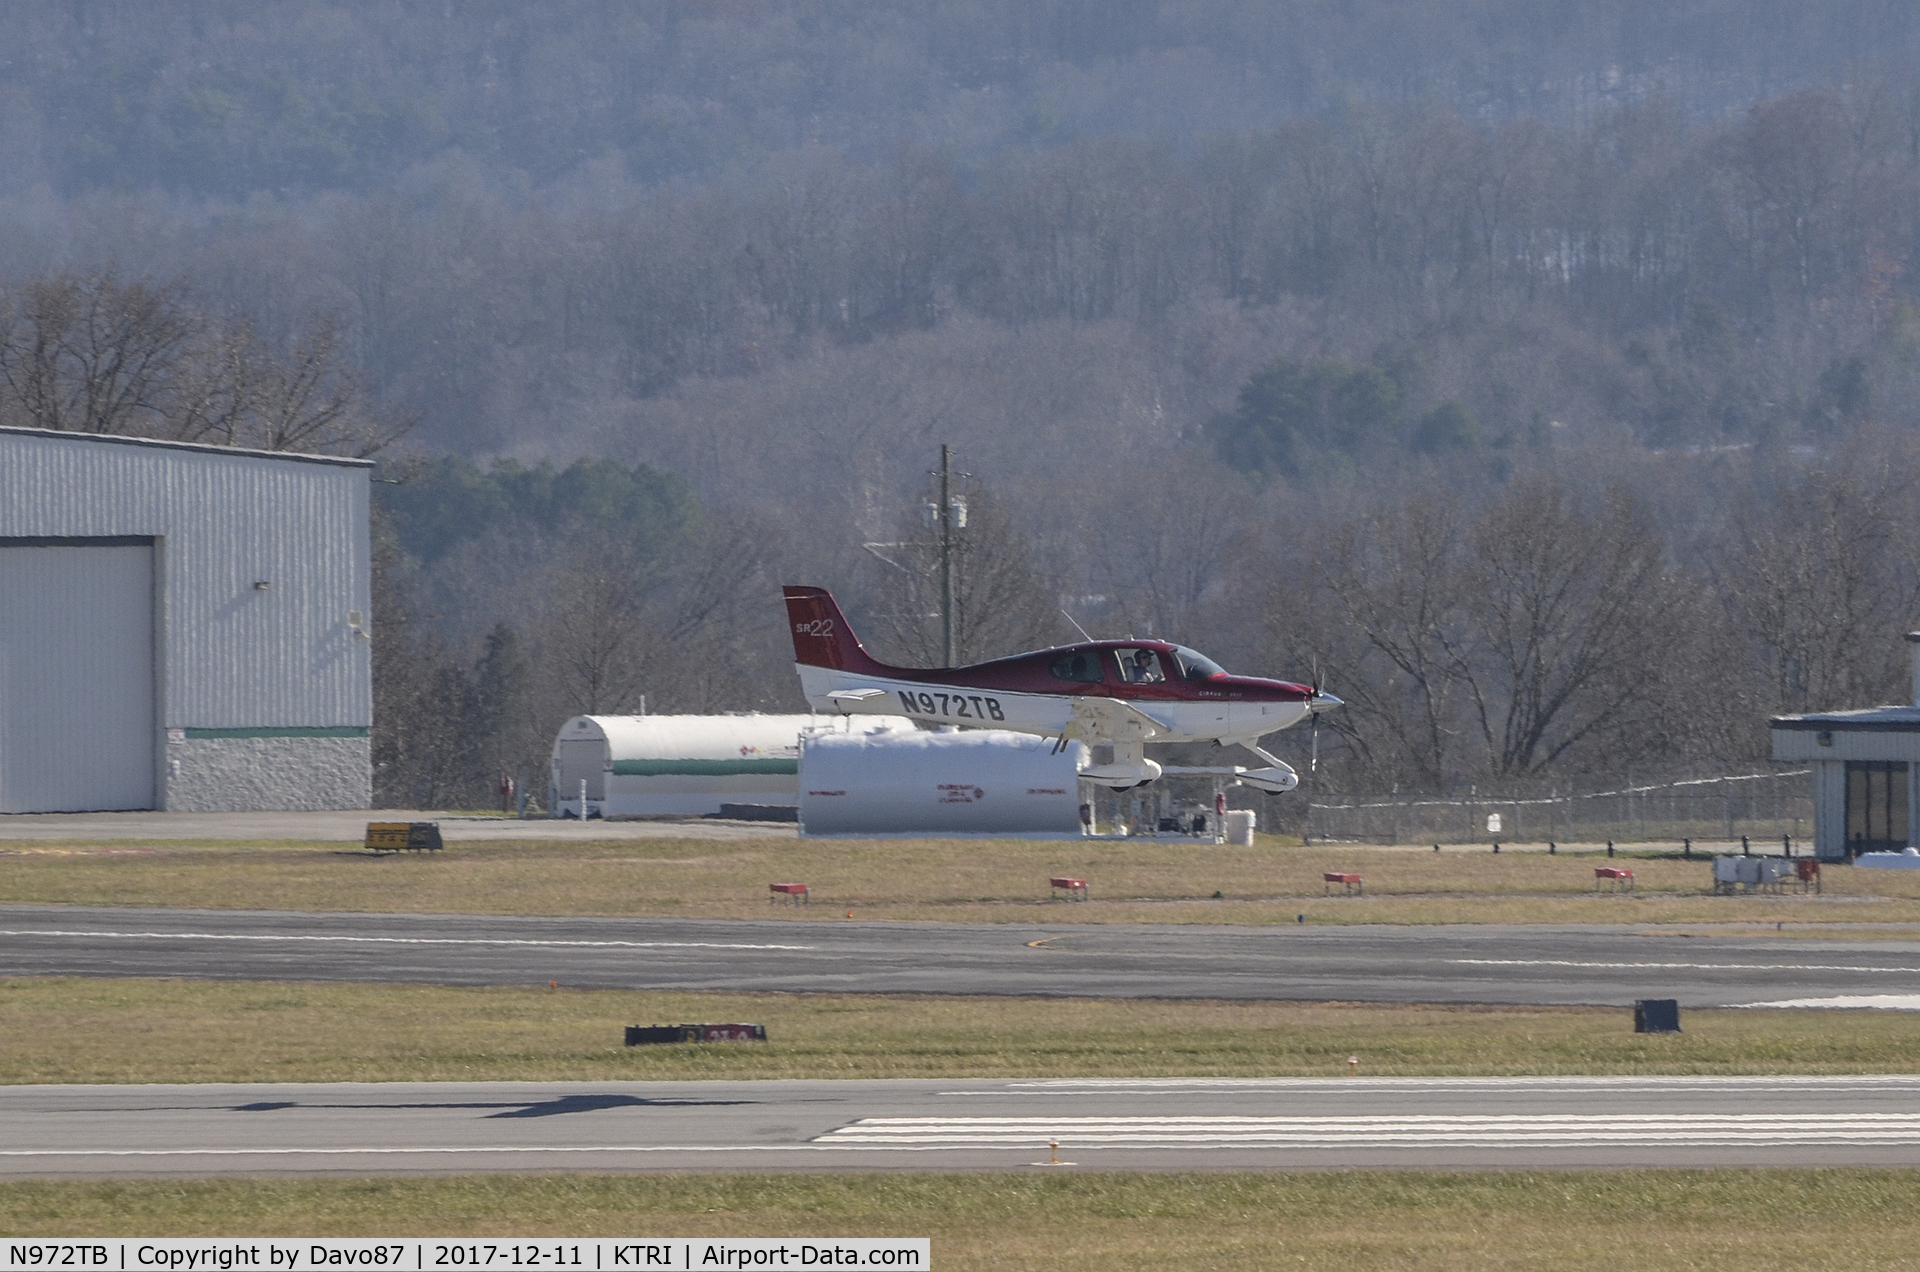 N972TB, Cirrus SR22 C/N 3778, About to land at Tri-Cities Airport (KTRI) in Blountville, TN.